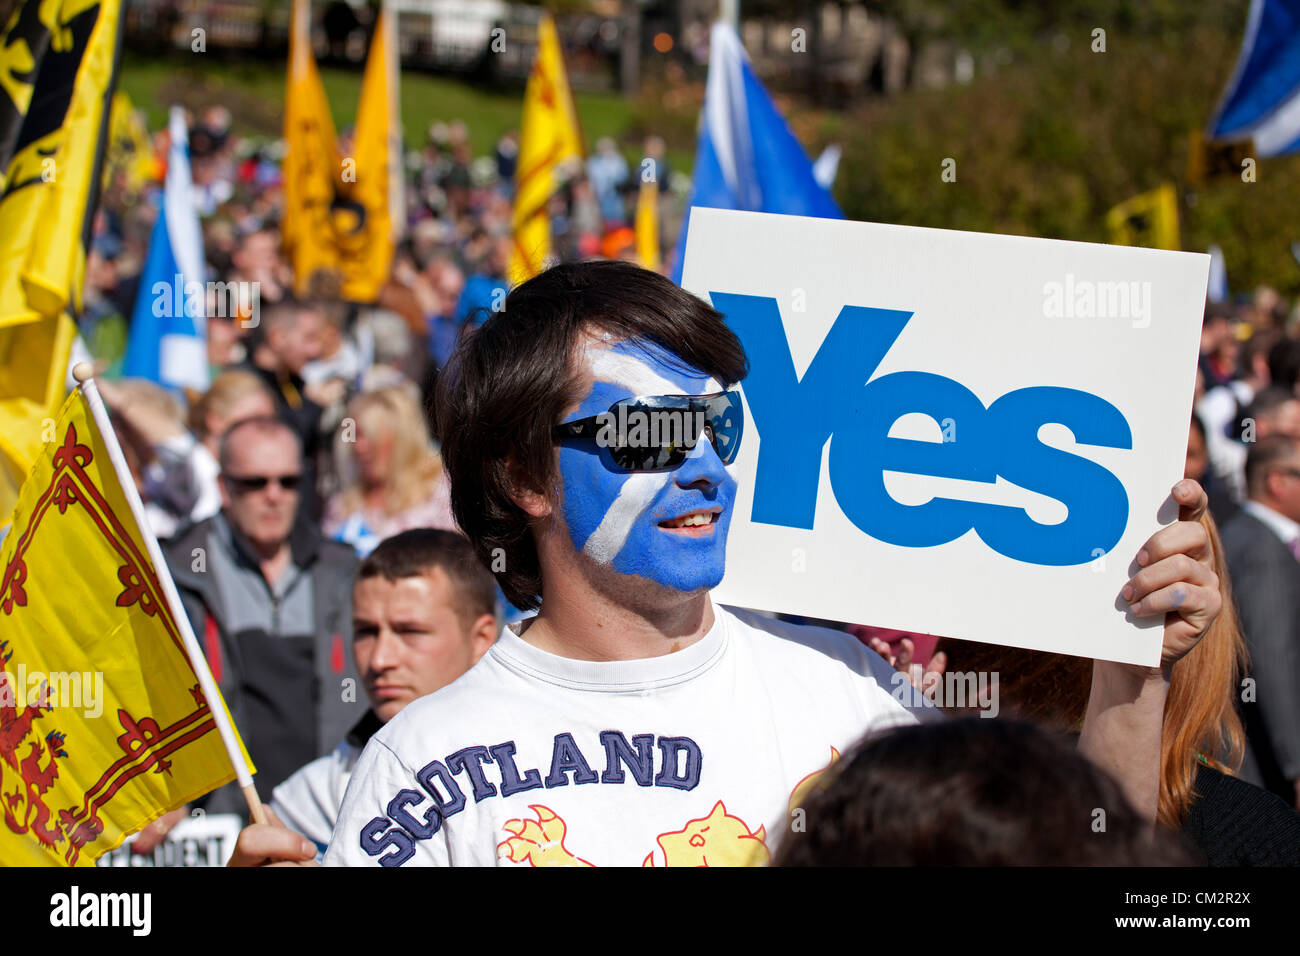 22 September 2012, Edinburgh, an estimated Five Thousand people took part in an event in the city aimed at  demonstrating support for independence.  Both young and old waving saltires and lion rampant flags gathered in  Princes Street Gardens.   The rally was staged under the banner Independence for Scotland and is not part of the official Yes Scotland campaign. Stock Photo